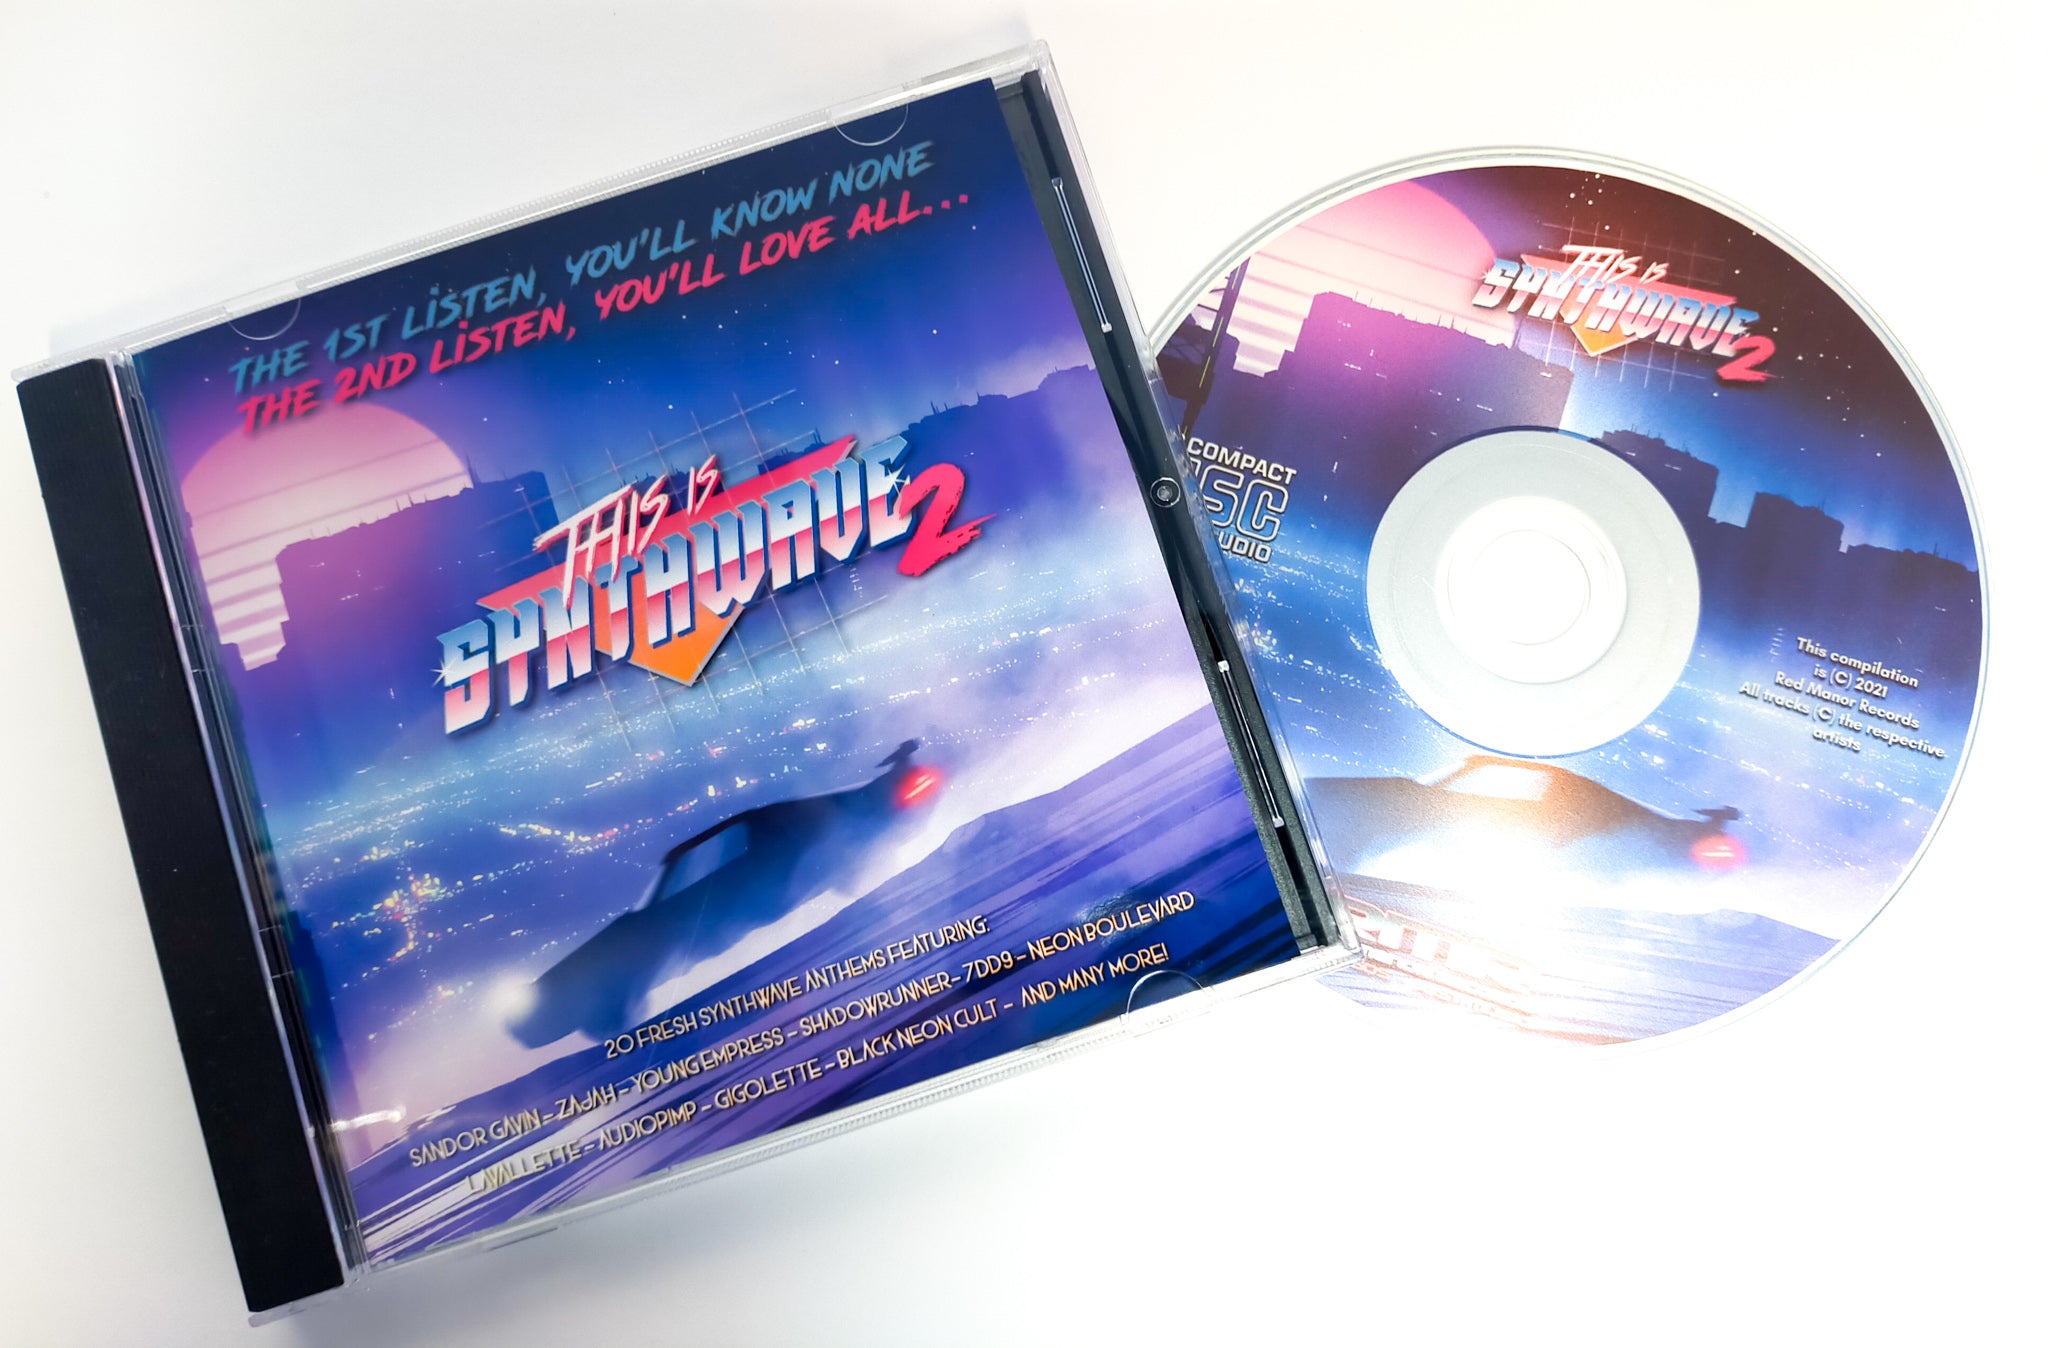 This Is Synthwave 2 - Compact Disc